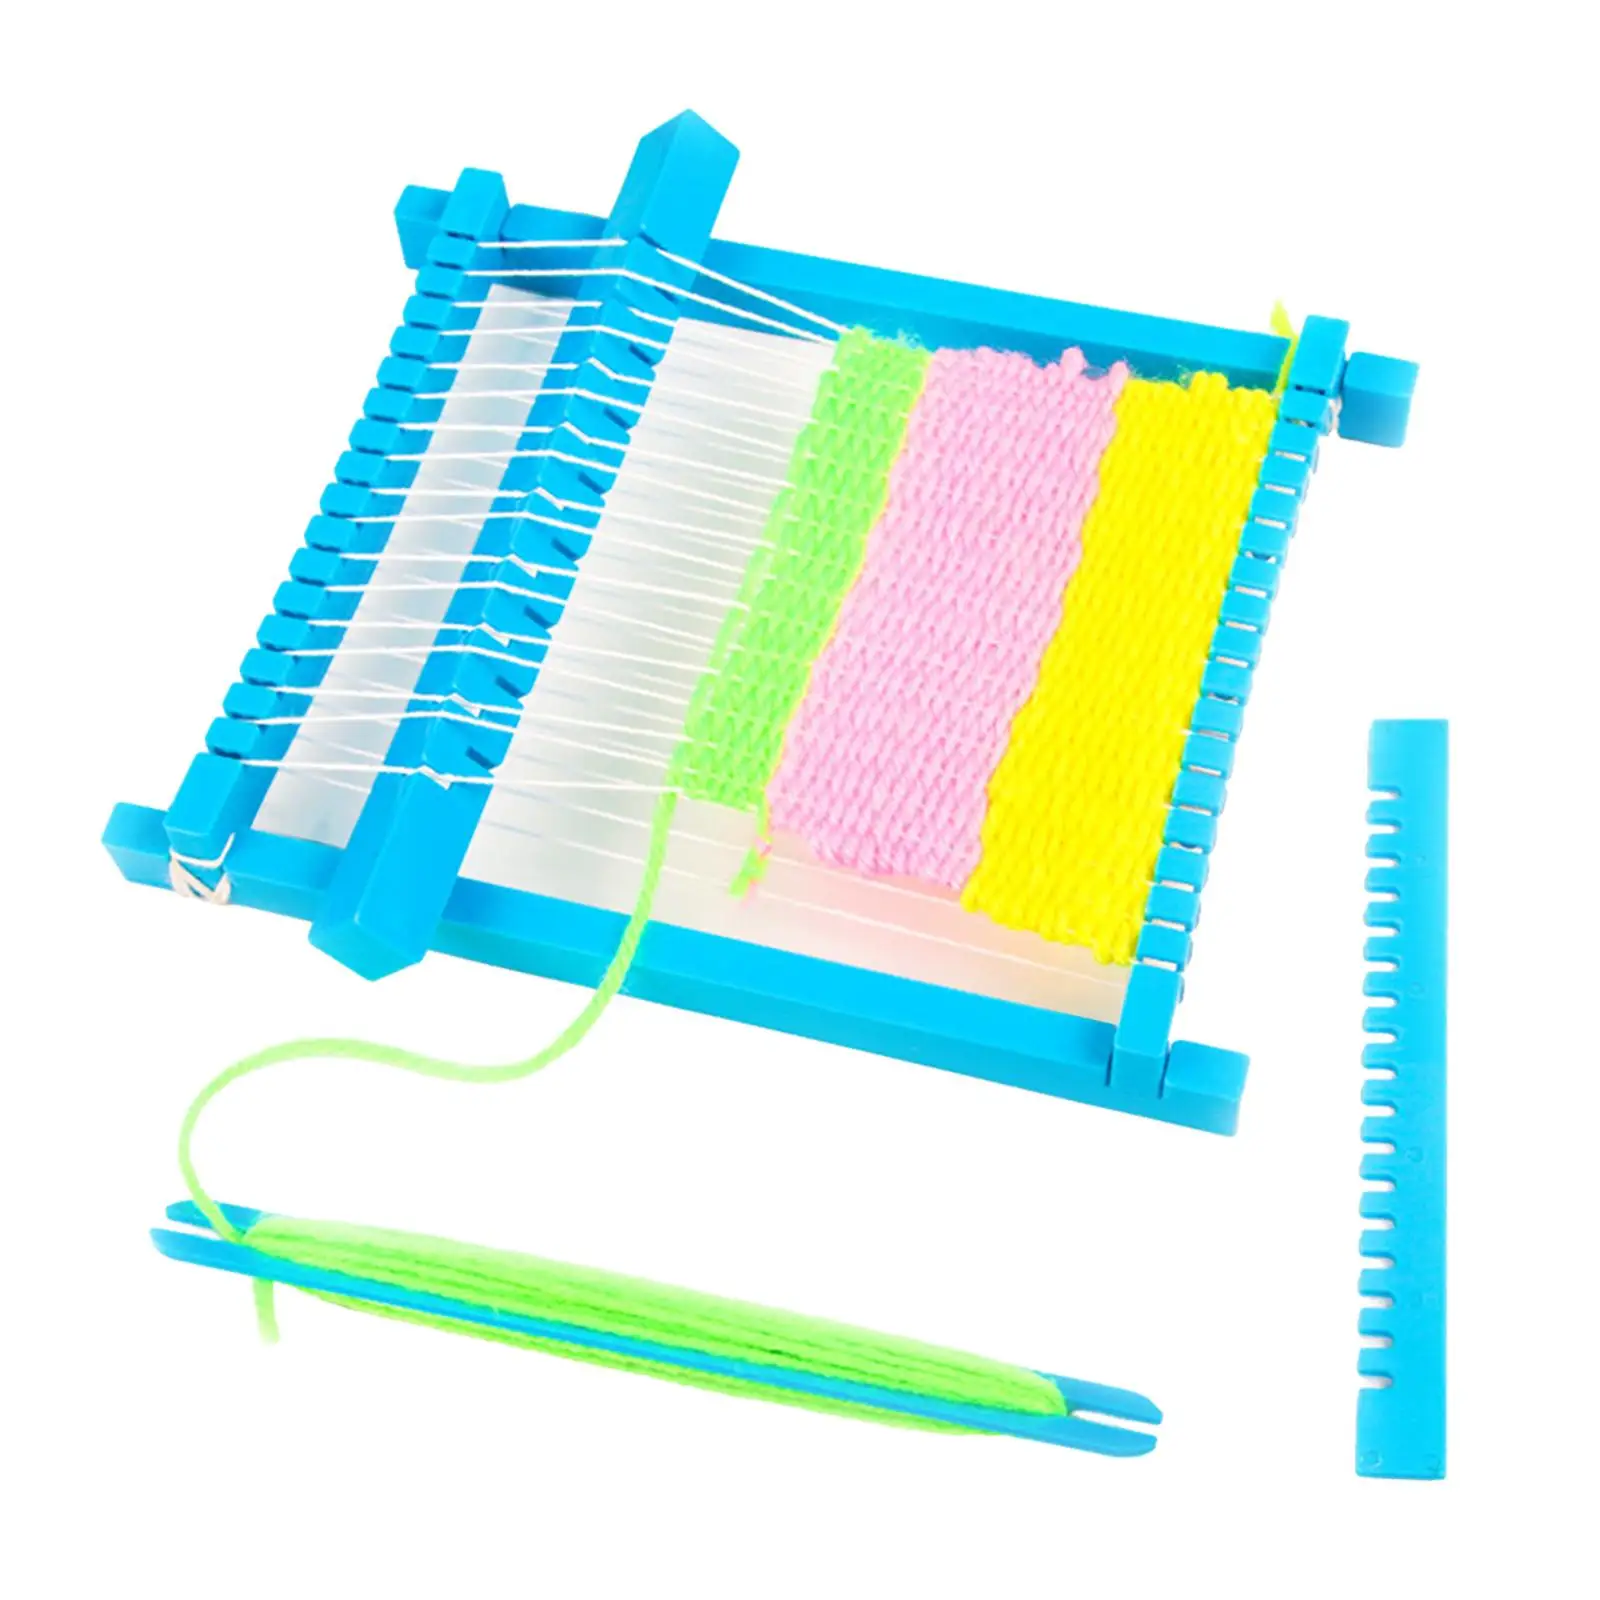 

Weaving Loom Tool Hand Knitted with Accs Educational Creative DIY Tapestry Yarn Scarf Knitting Frame for Kids Children Beginners